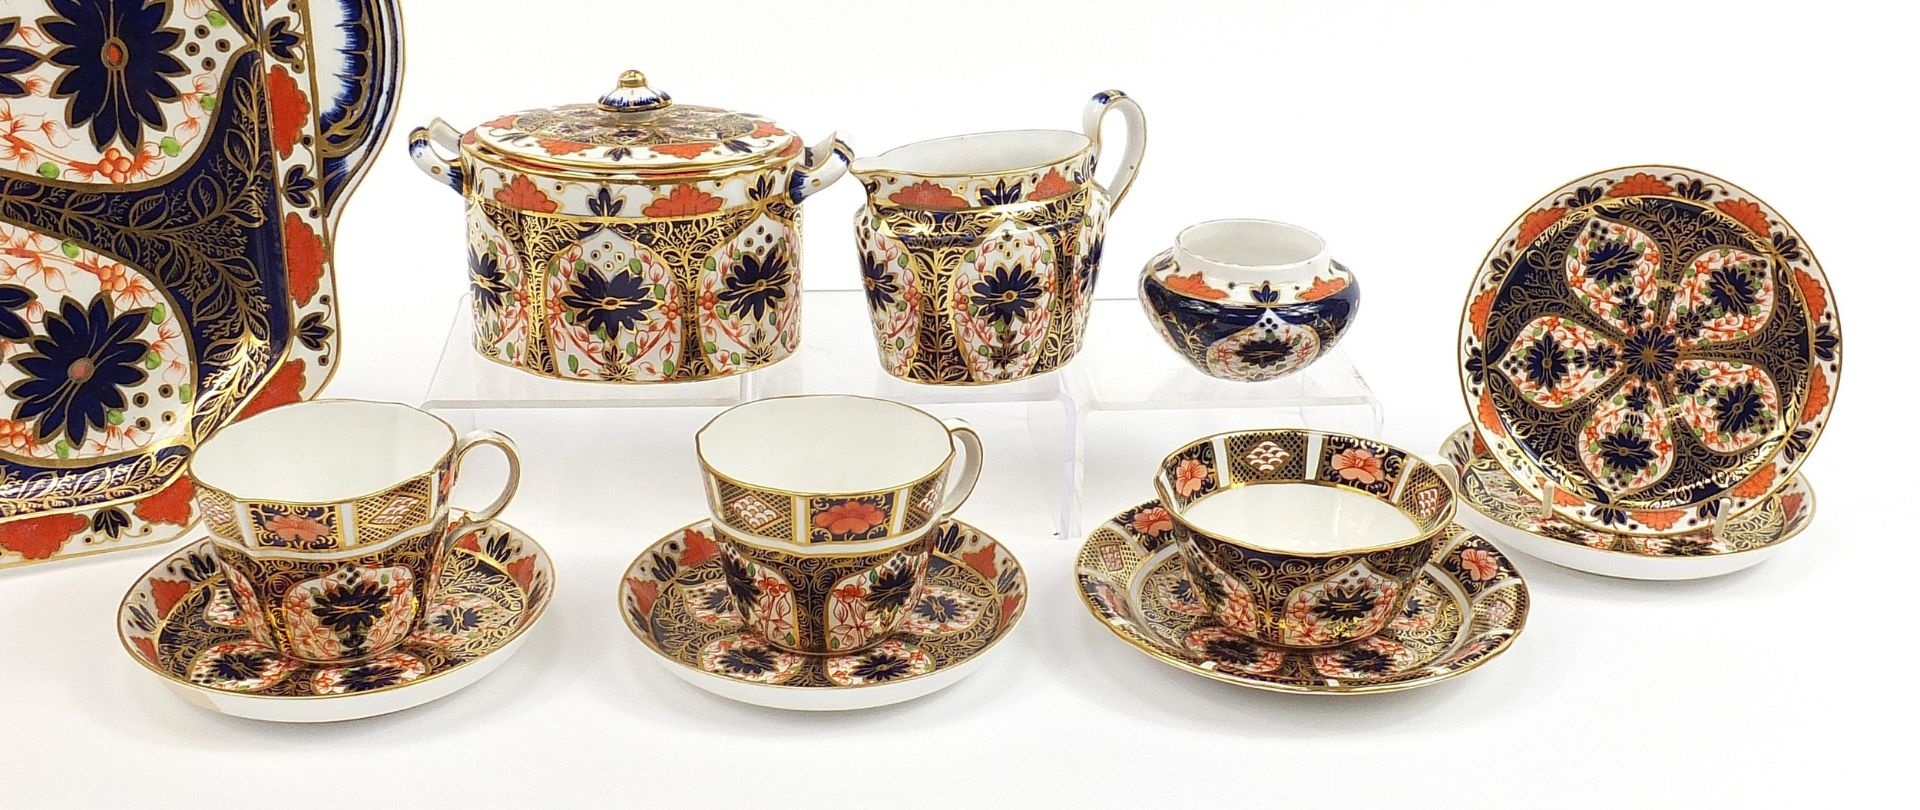 Royal Crown Derby Imari pattern teaware including a twin handled tray, sugar bowl with cover and - Image 3 of 5